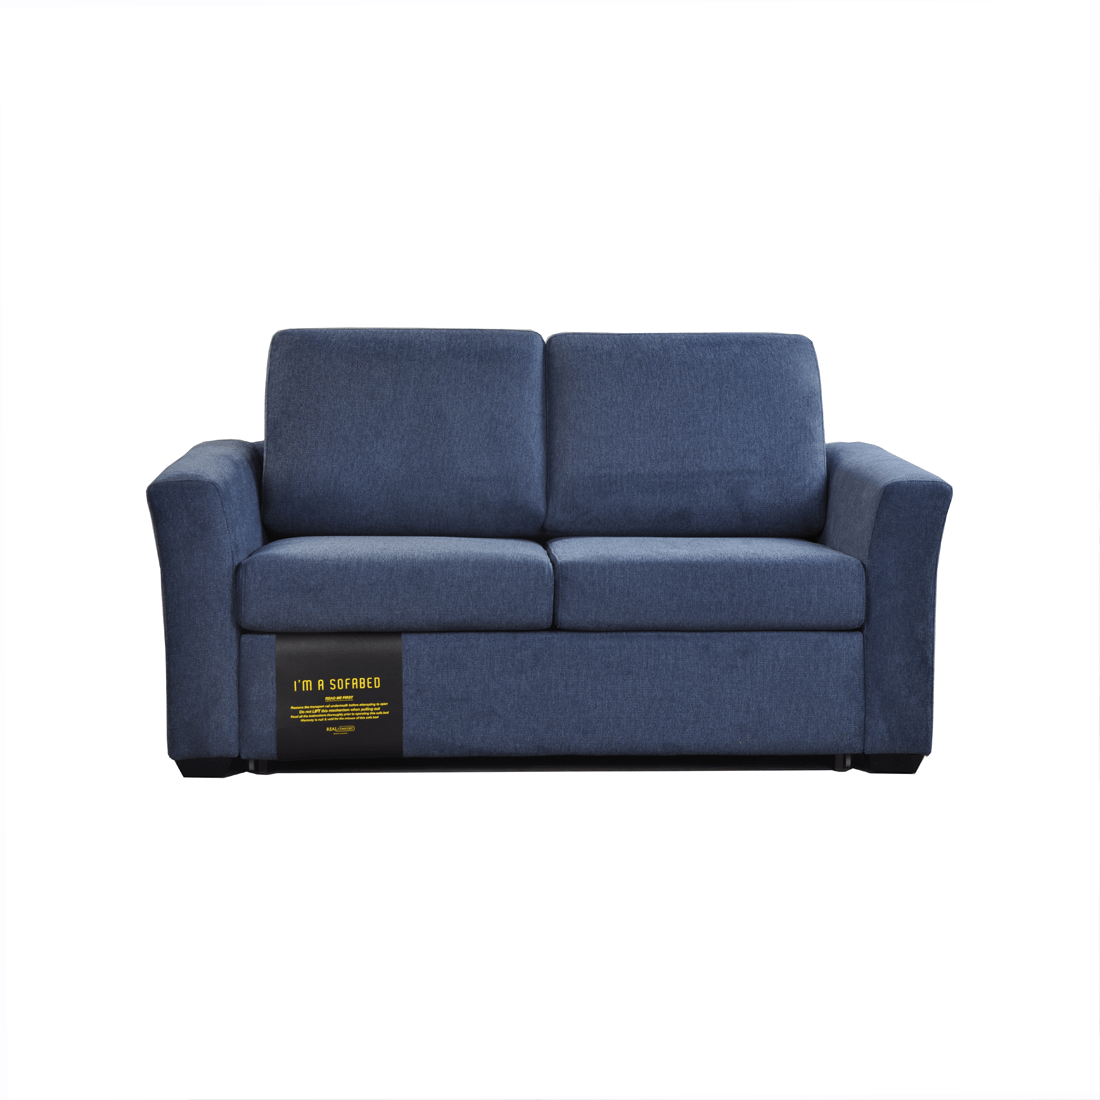 Abbey 2 Seater Fabric Double Sofa Bed